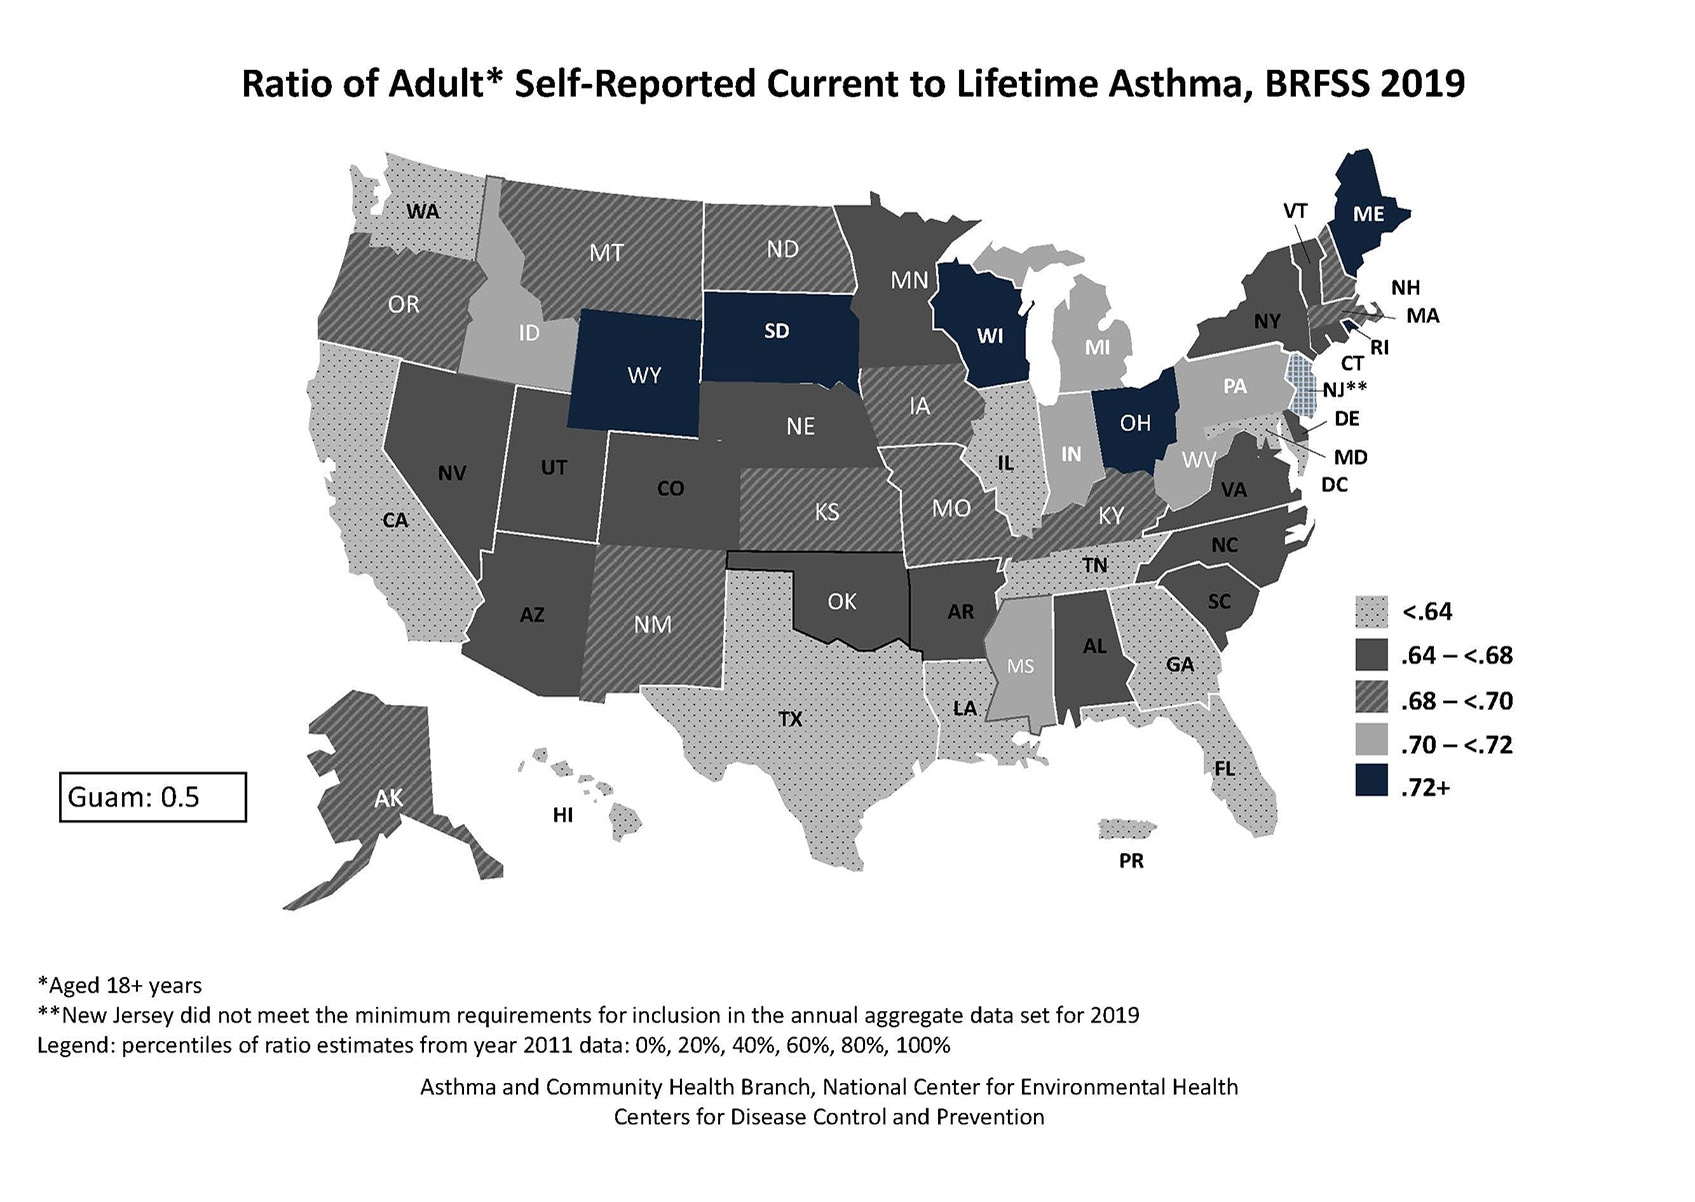 Black and white U.S. map showing ratio of adult self-reported current to lifetime asthma by state for BRFSS 2019